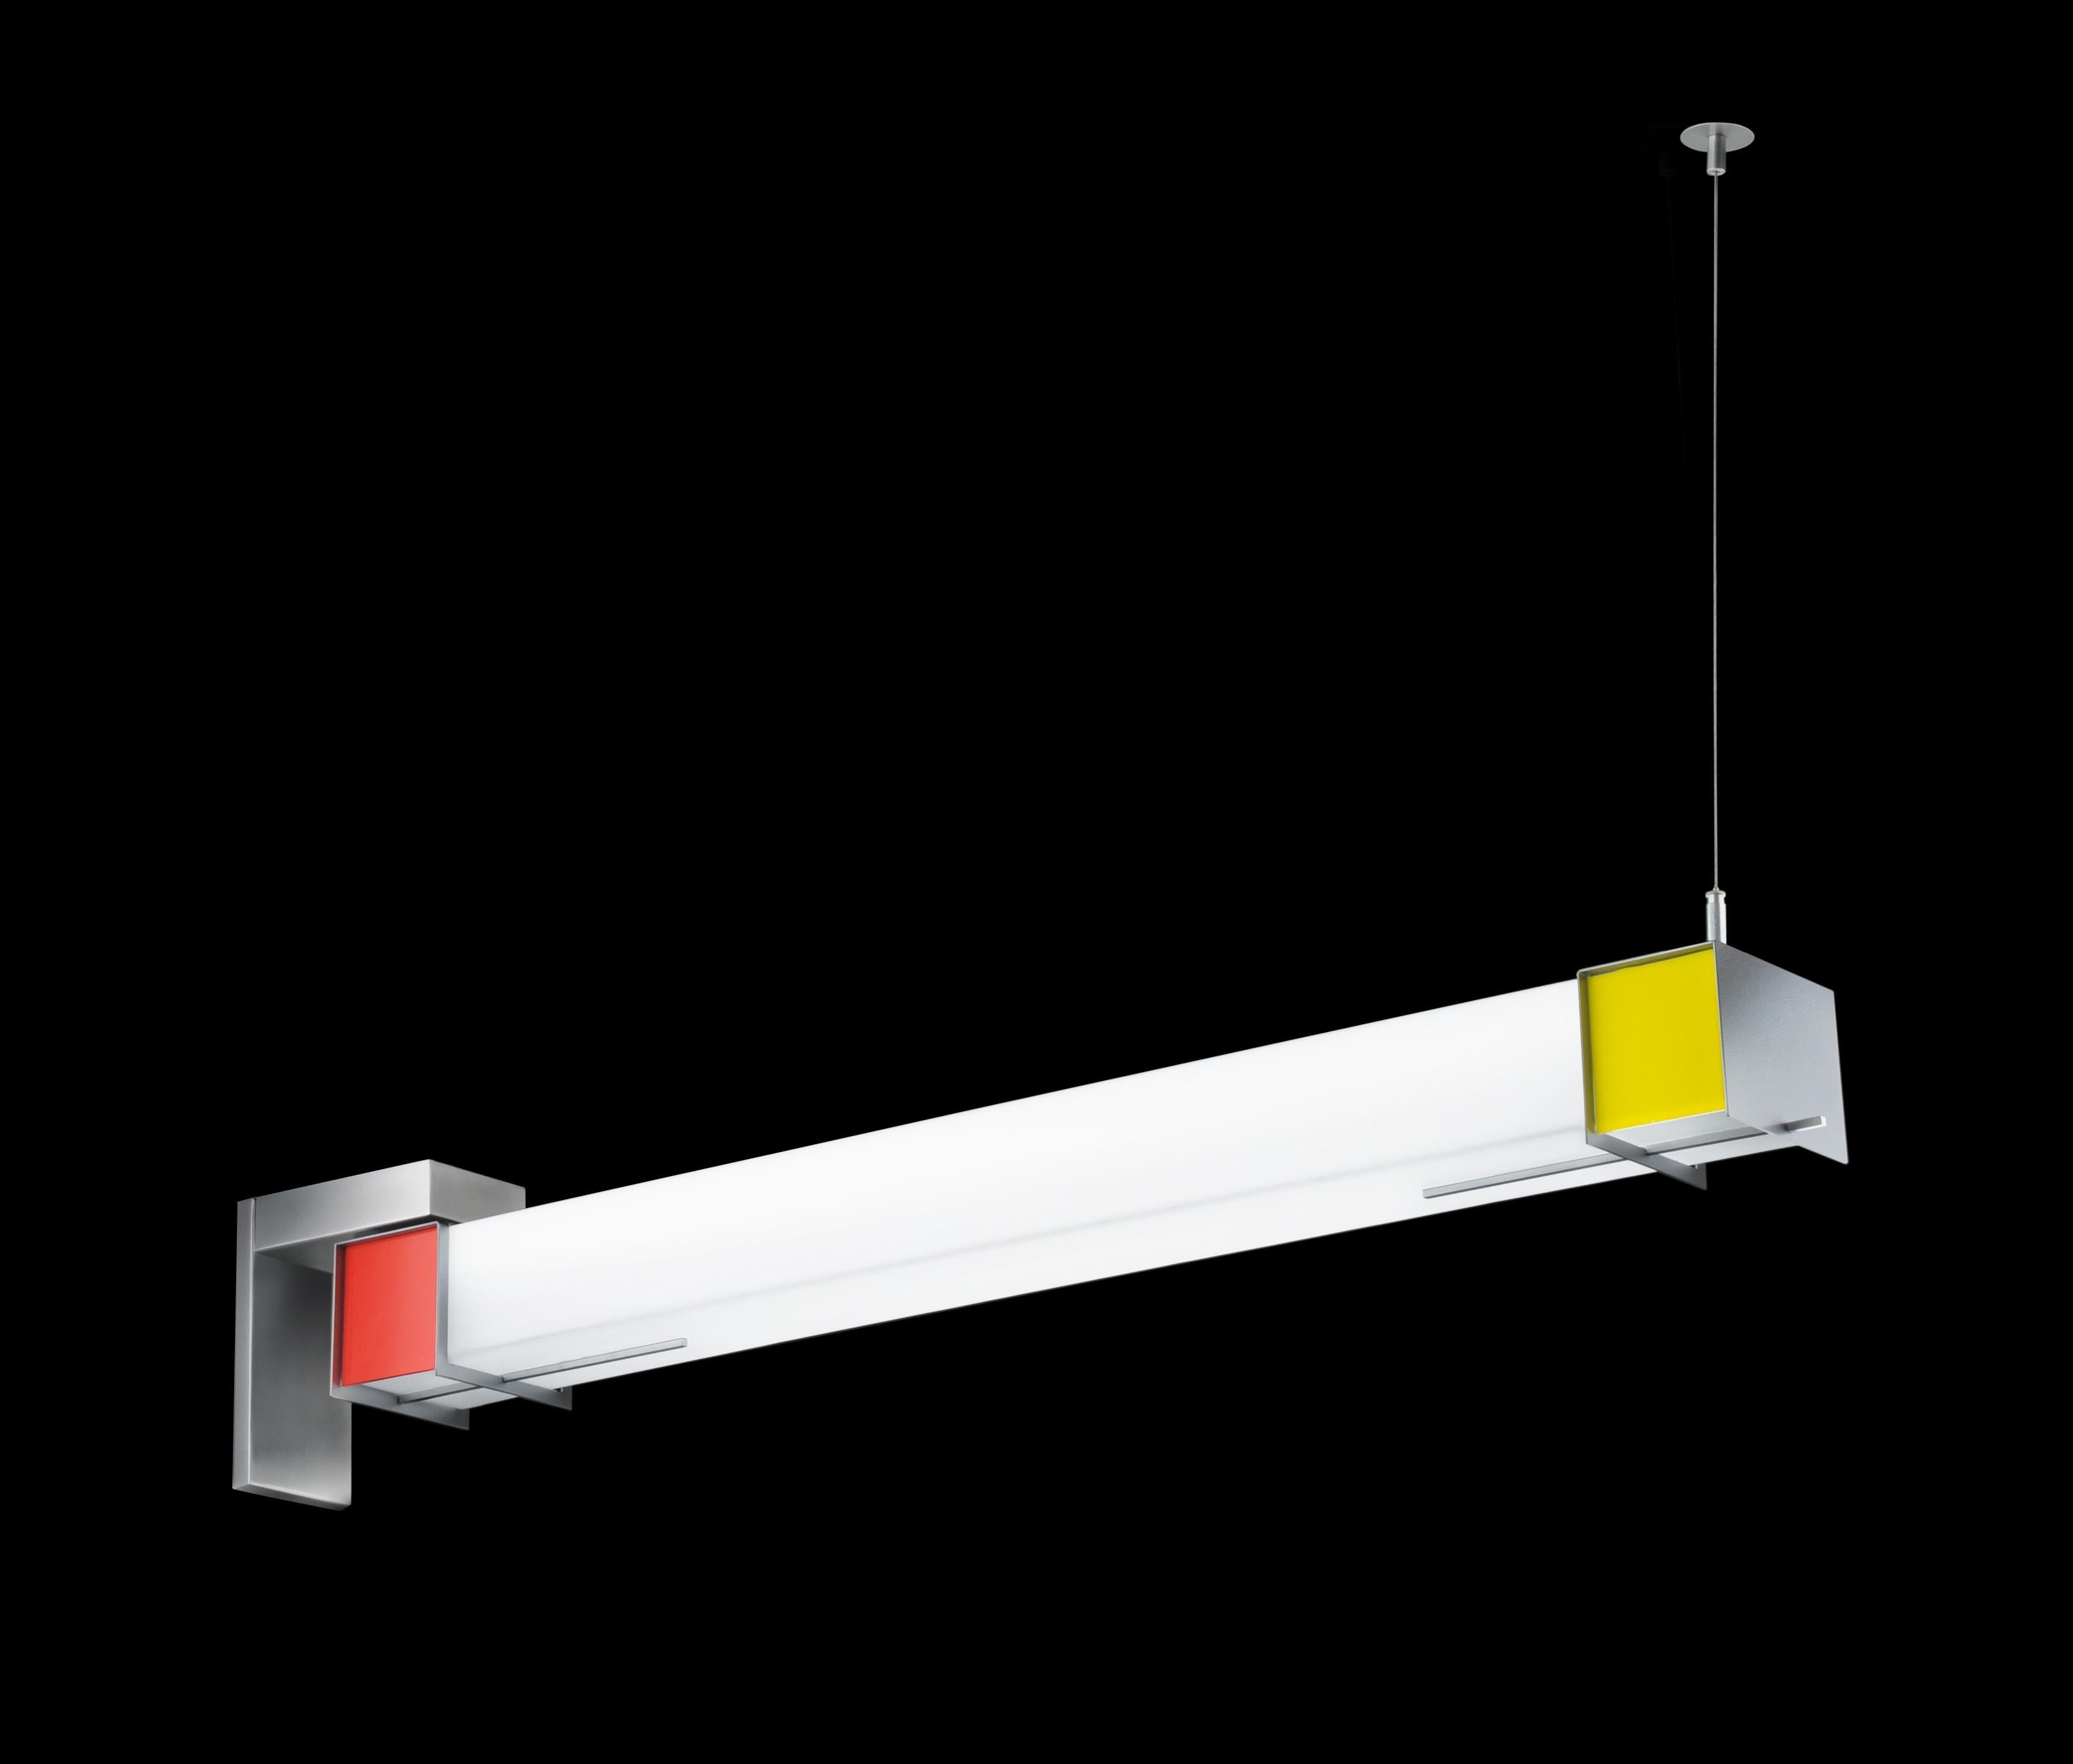 Unique wall-mounted pendant with white glass diffuser and painted steel housing. Red, yellow and blue acrylic details. In the manner of Mid-Century Modern. LED Lamped, 3000k standard color temperature. Great for use in pairs.

Architect, Sandy